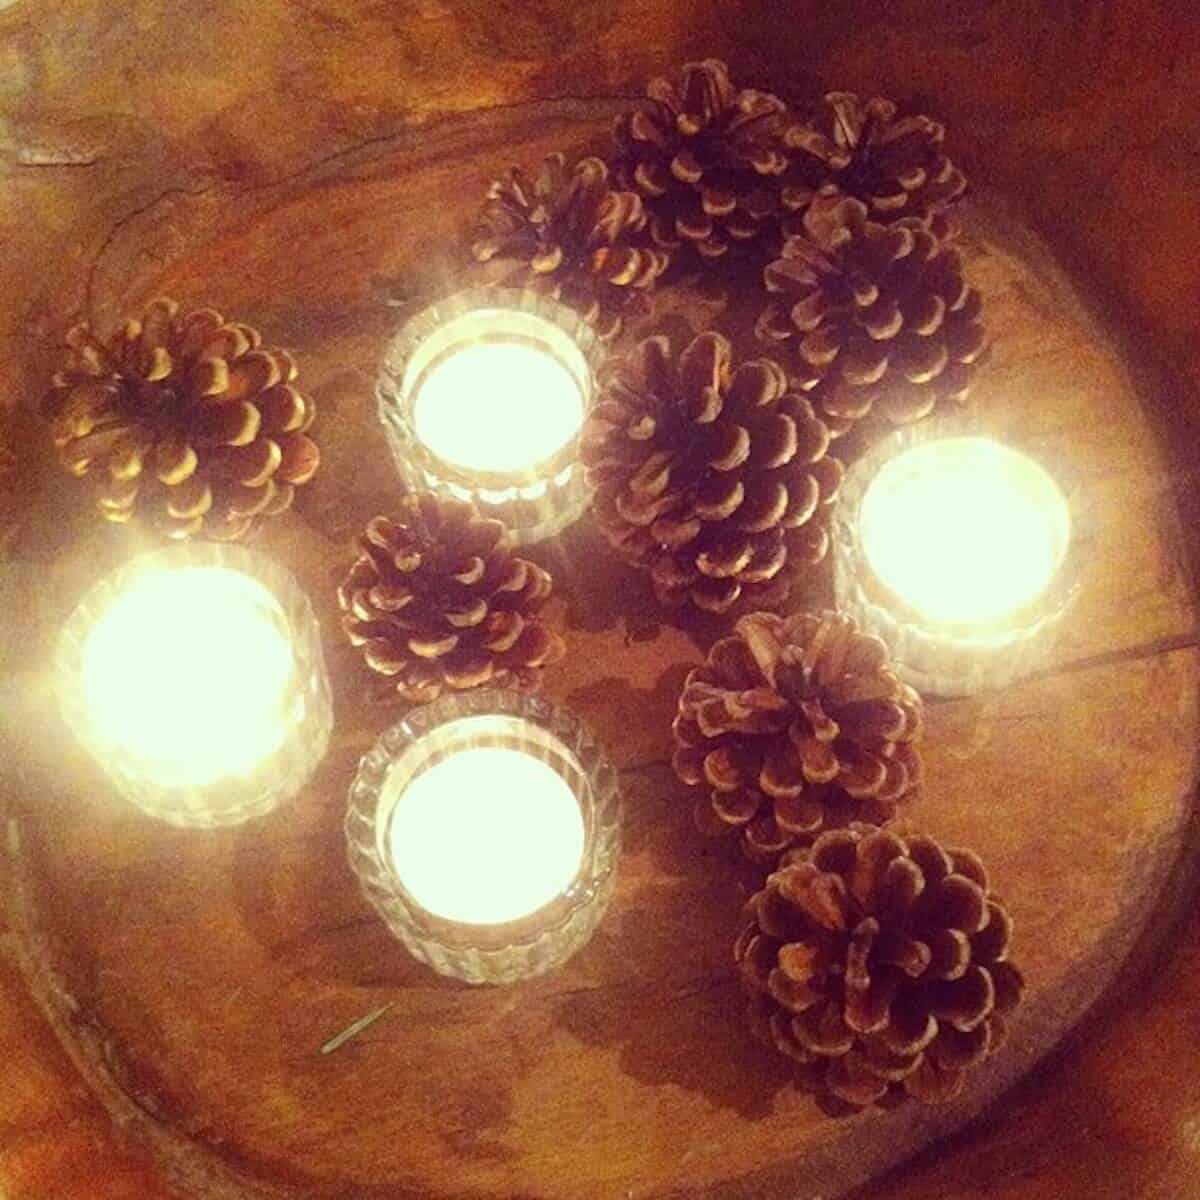 Natural Christmas Crafts & Decorations - Use pinecones and greenery